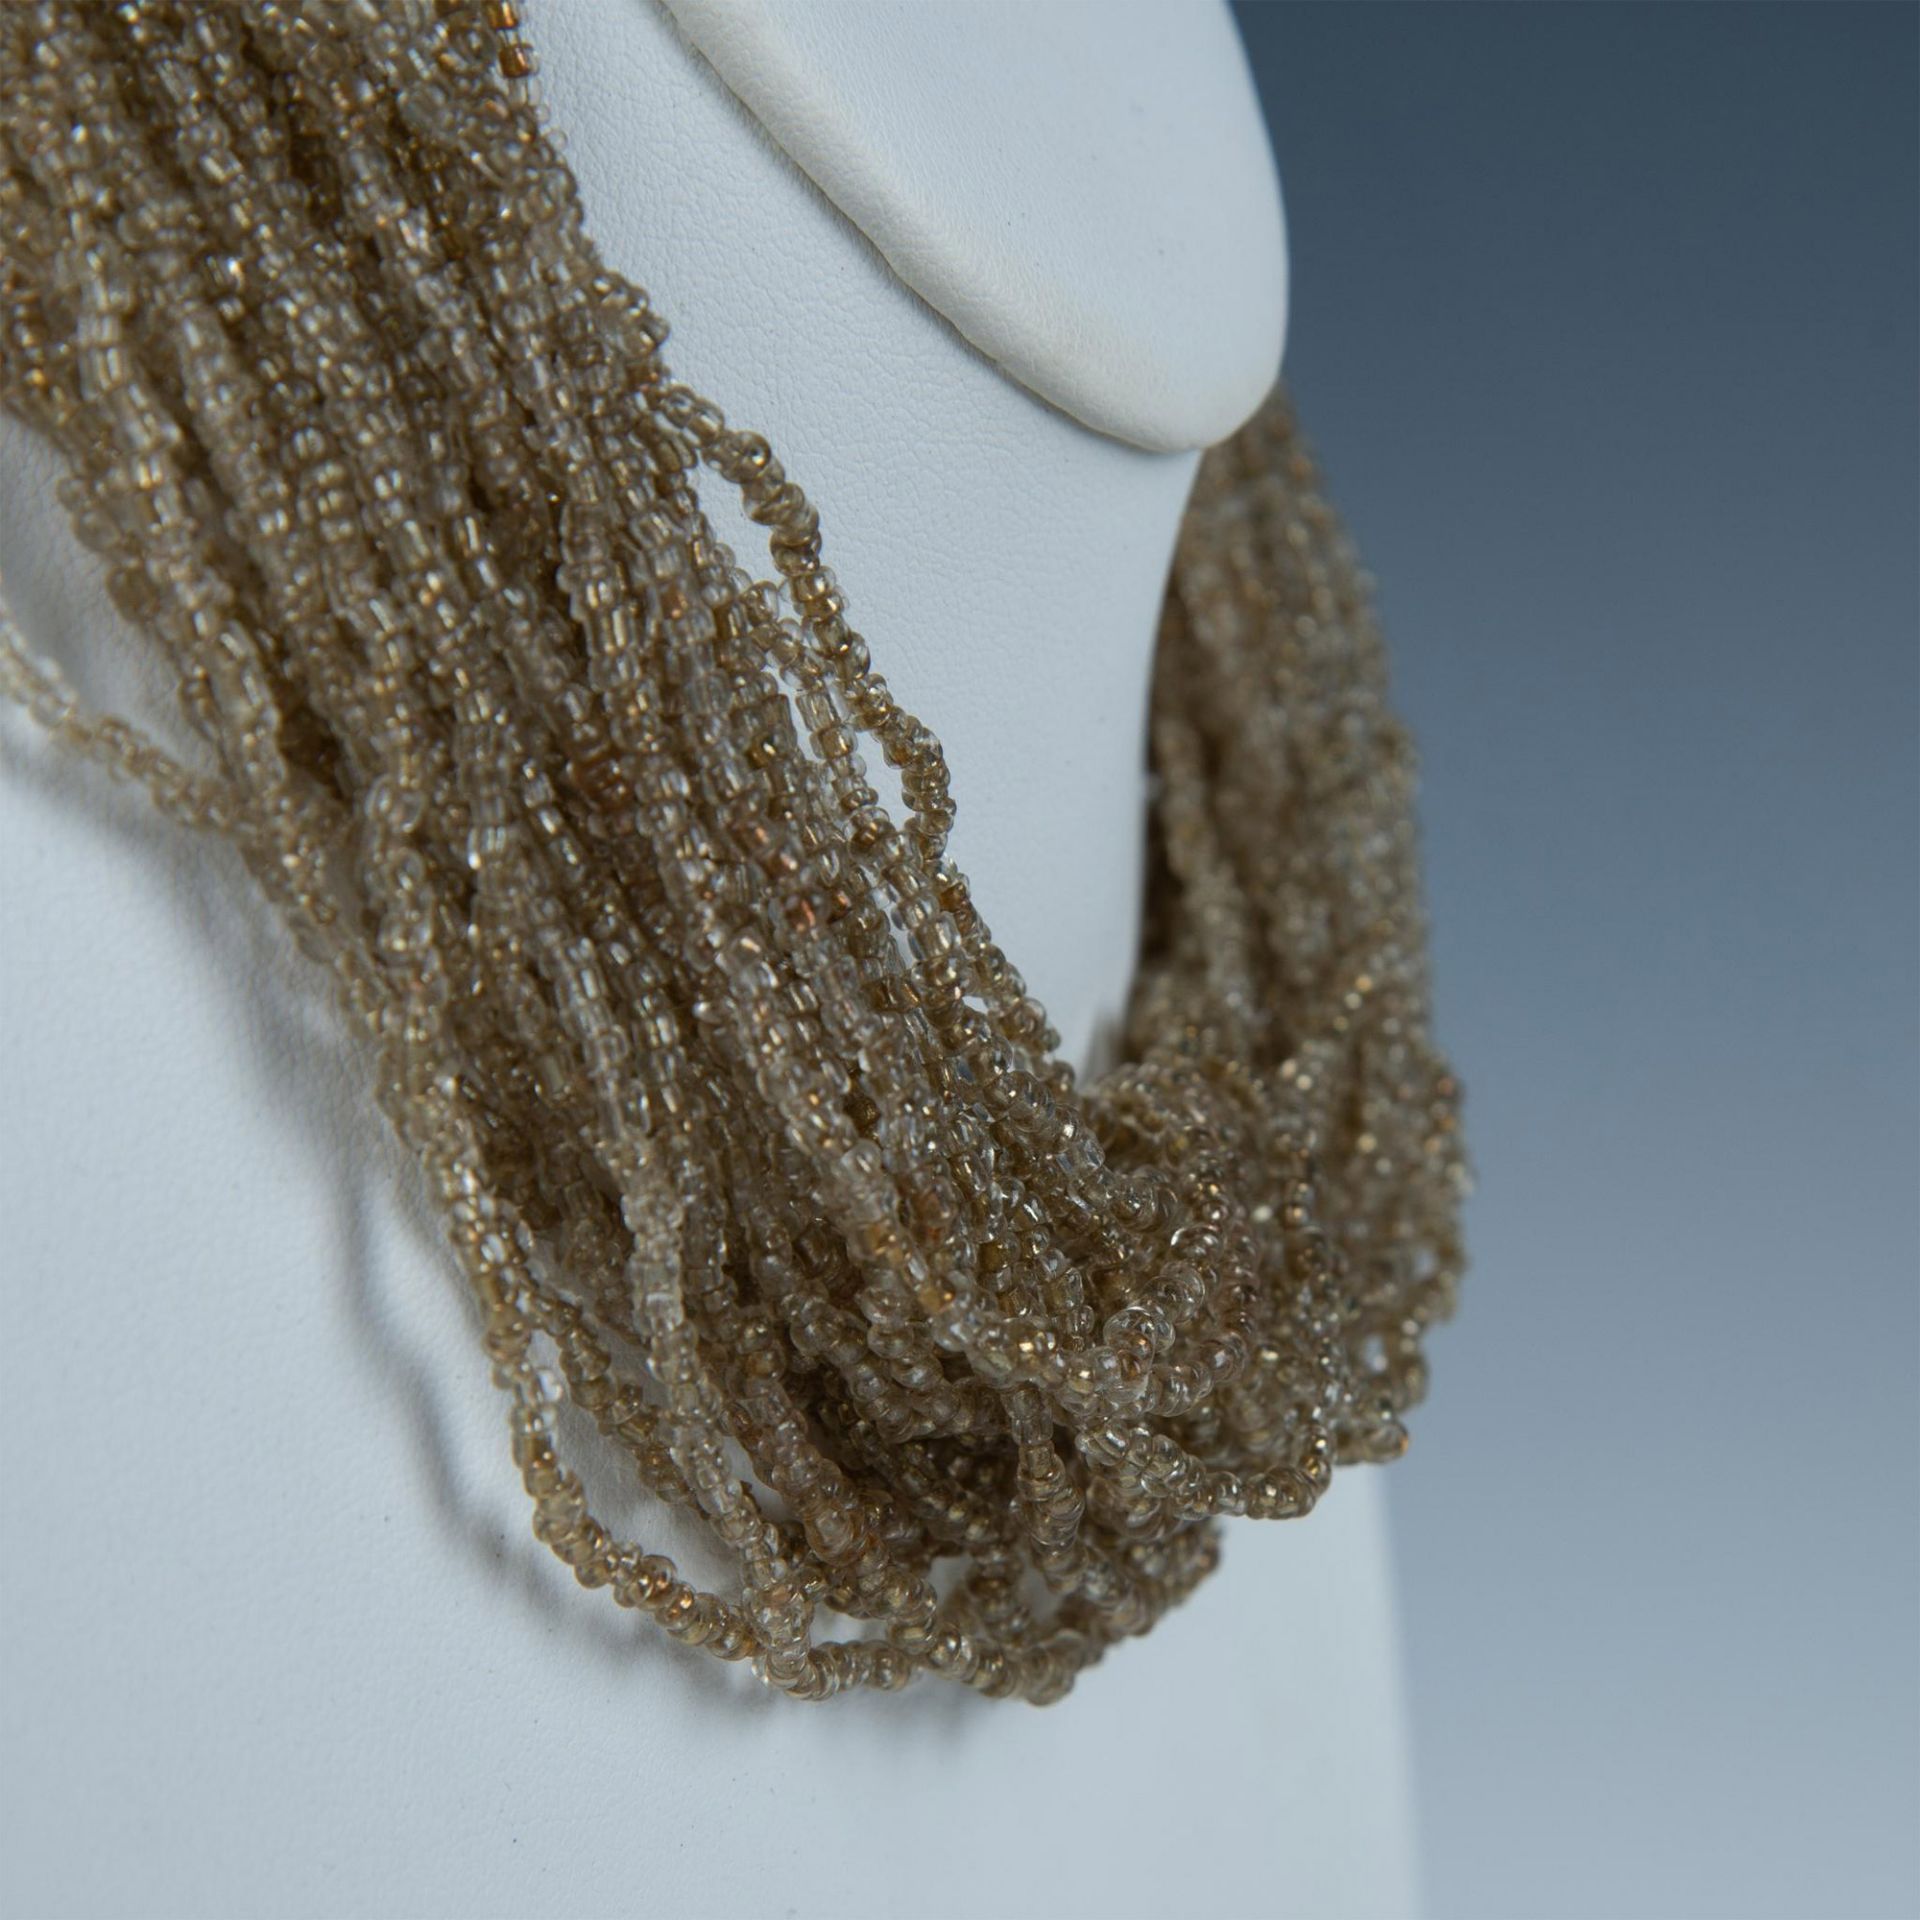 Beautiful Multi-Strand Champagne Bead Necklace - Image 2 of 3